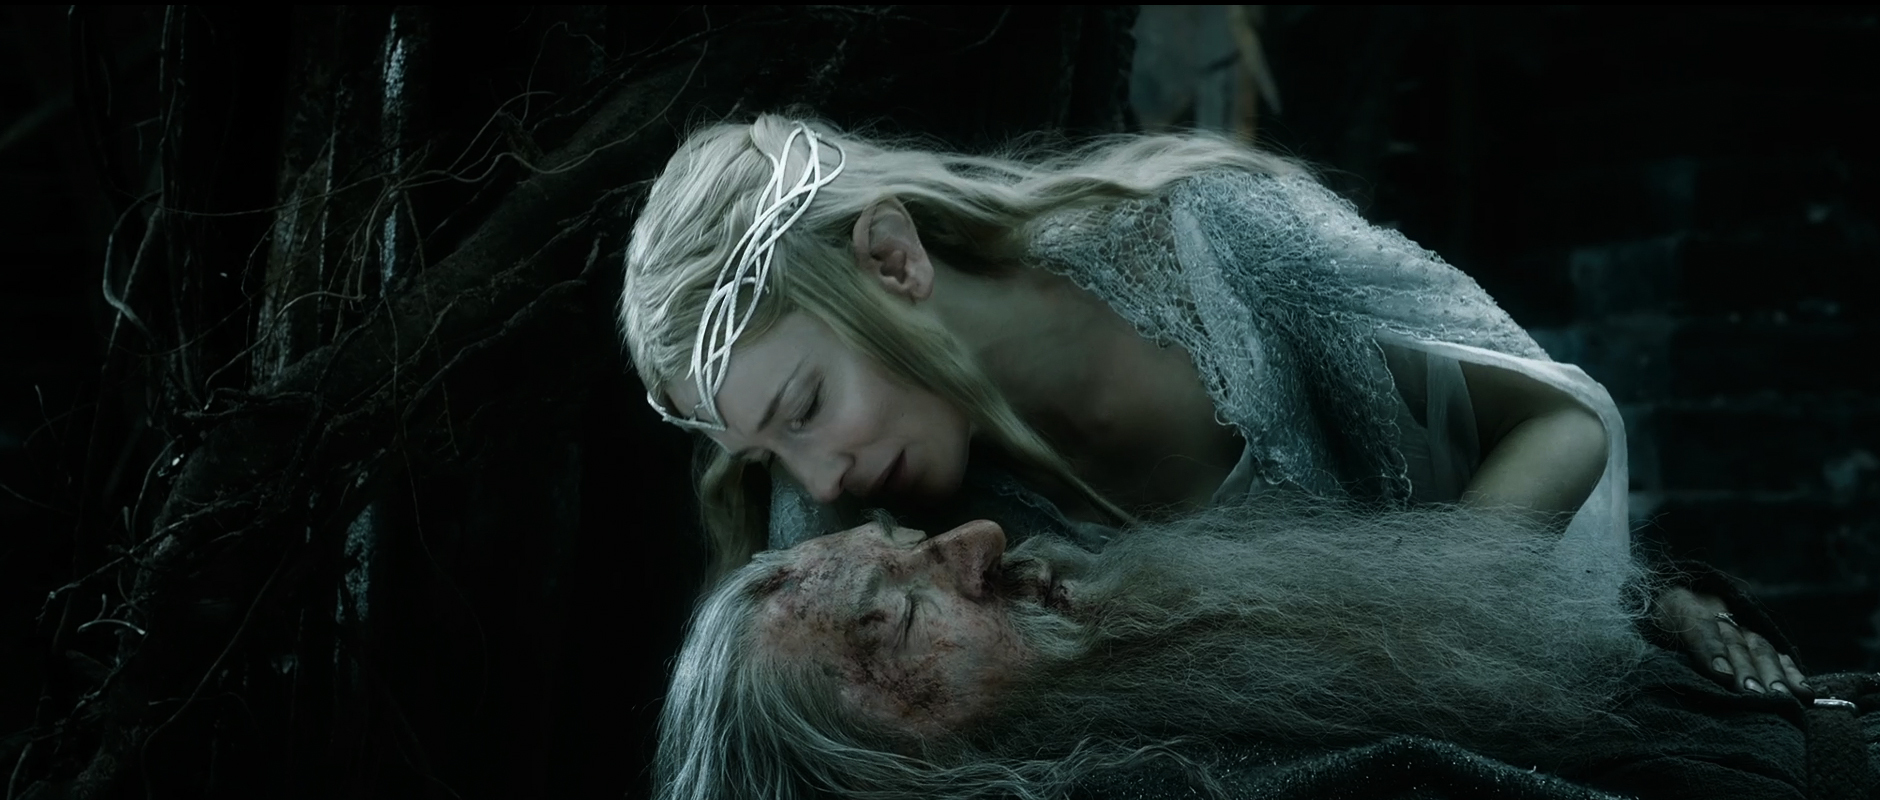 Hero image for The Hobbit: The Battle of the Five Armies